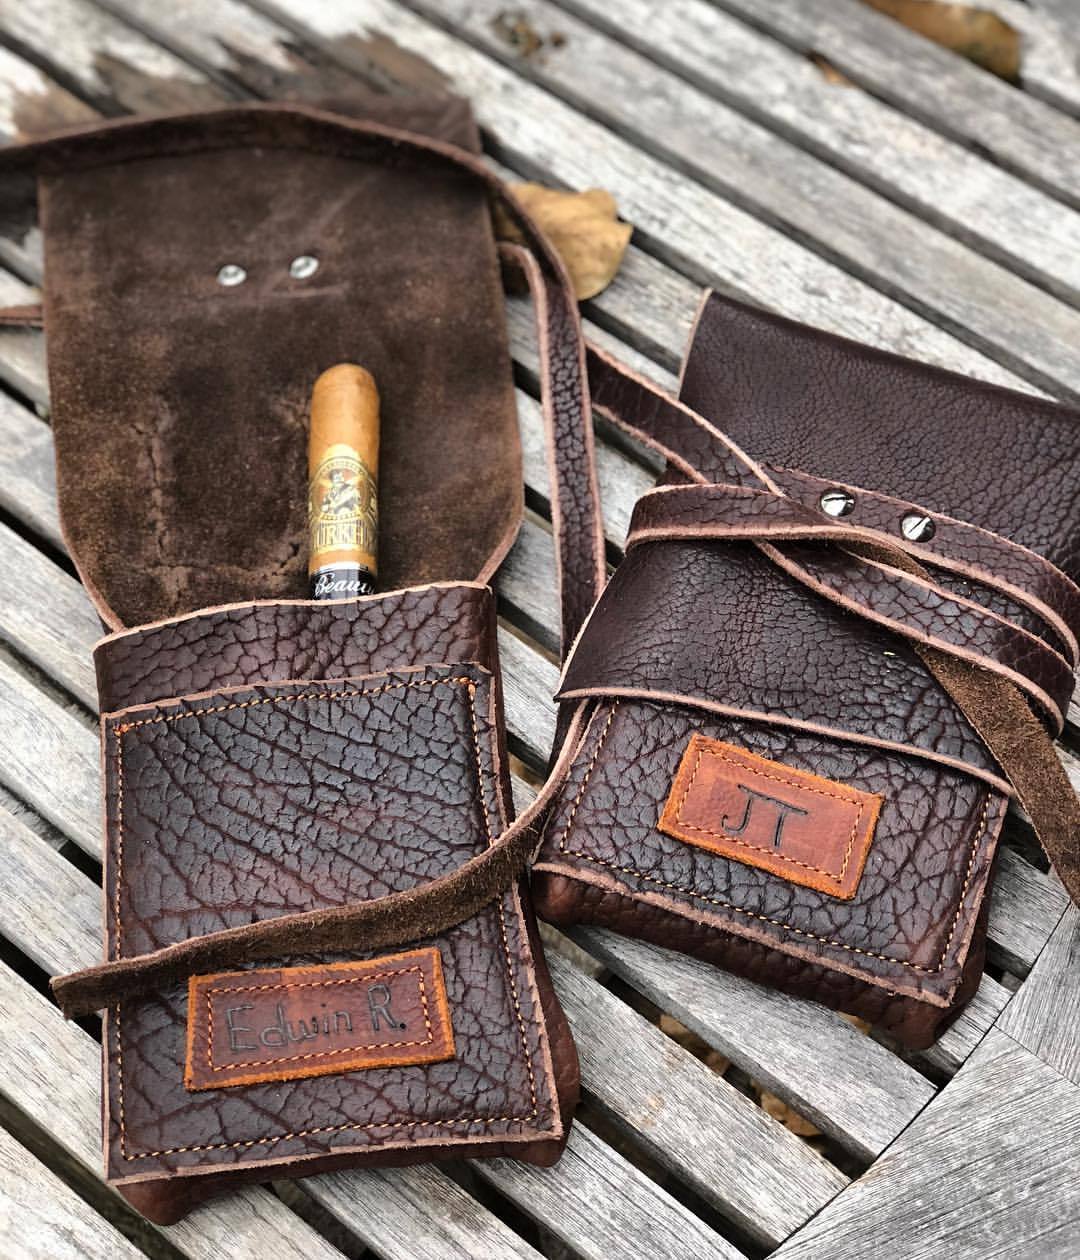 Custom heat branded American bison leather cigar carriers 🔥💨. Thick #originaldesign carriers to protect your sticks in #ruggedluxury style. See why these unique heirloom quality carriers are shipping all over the world! #madeinusa #veteranmade...